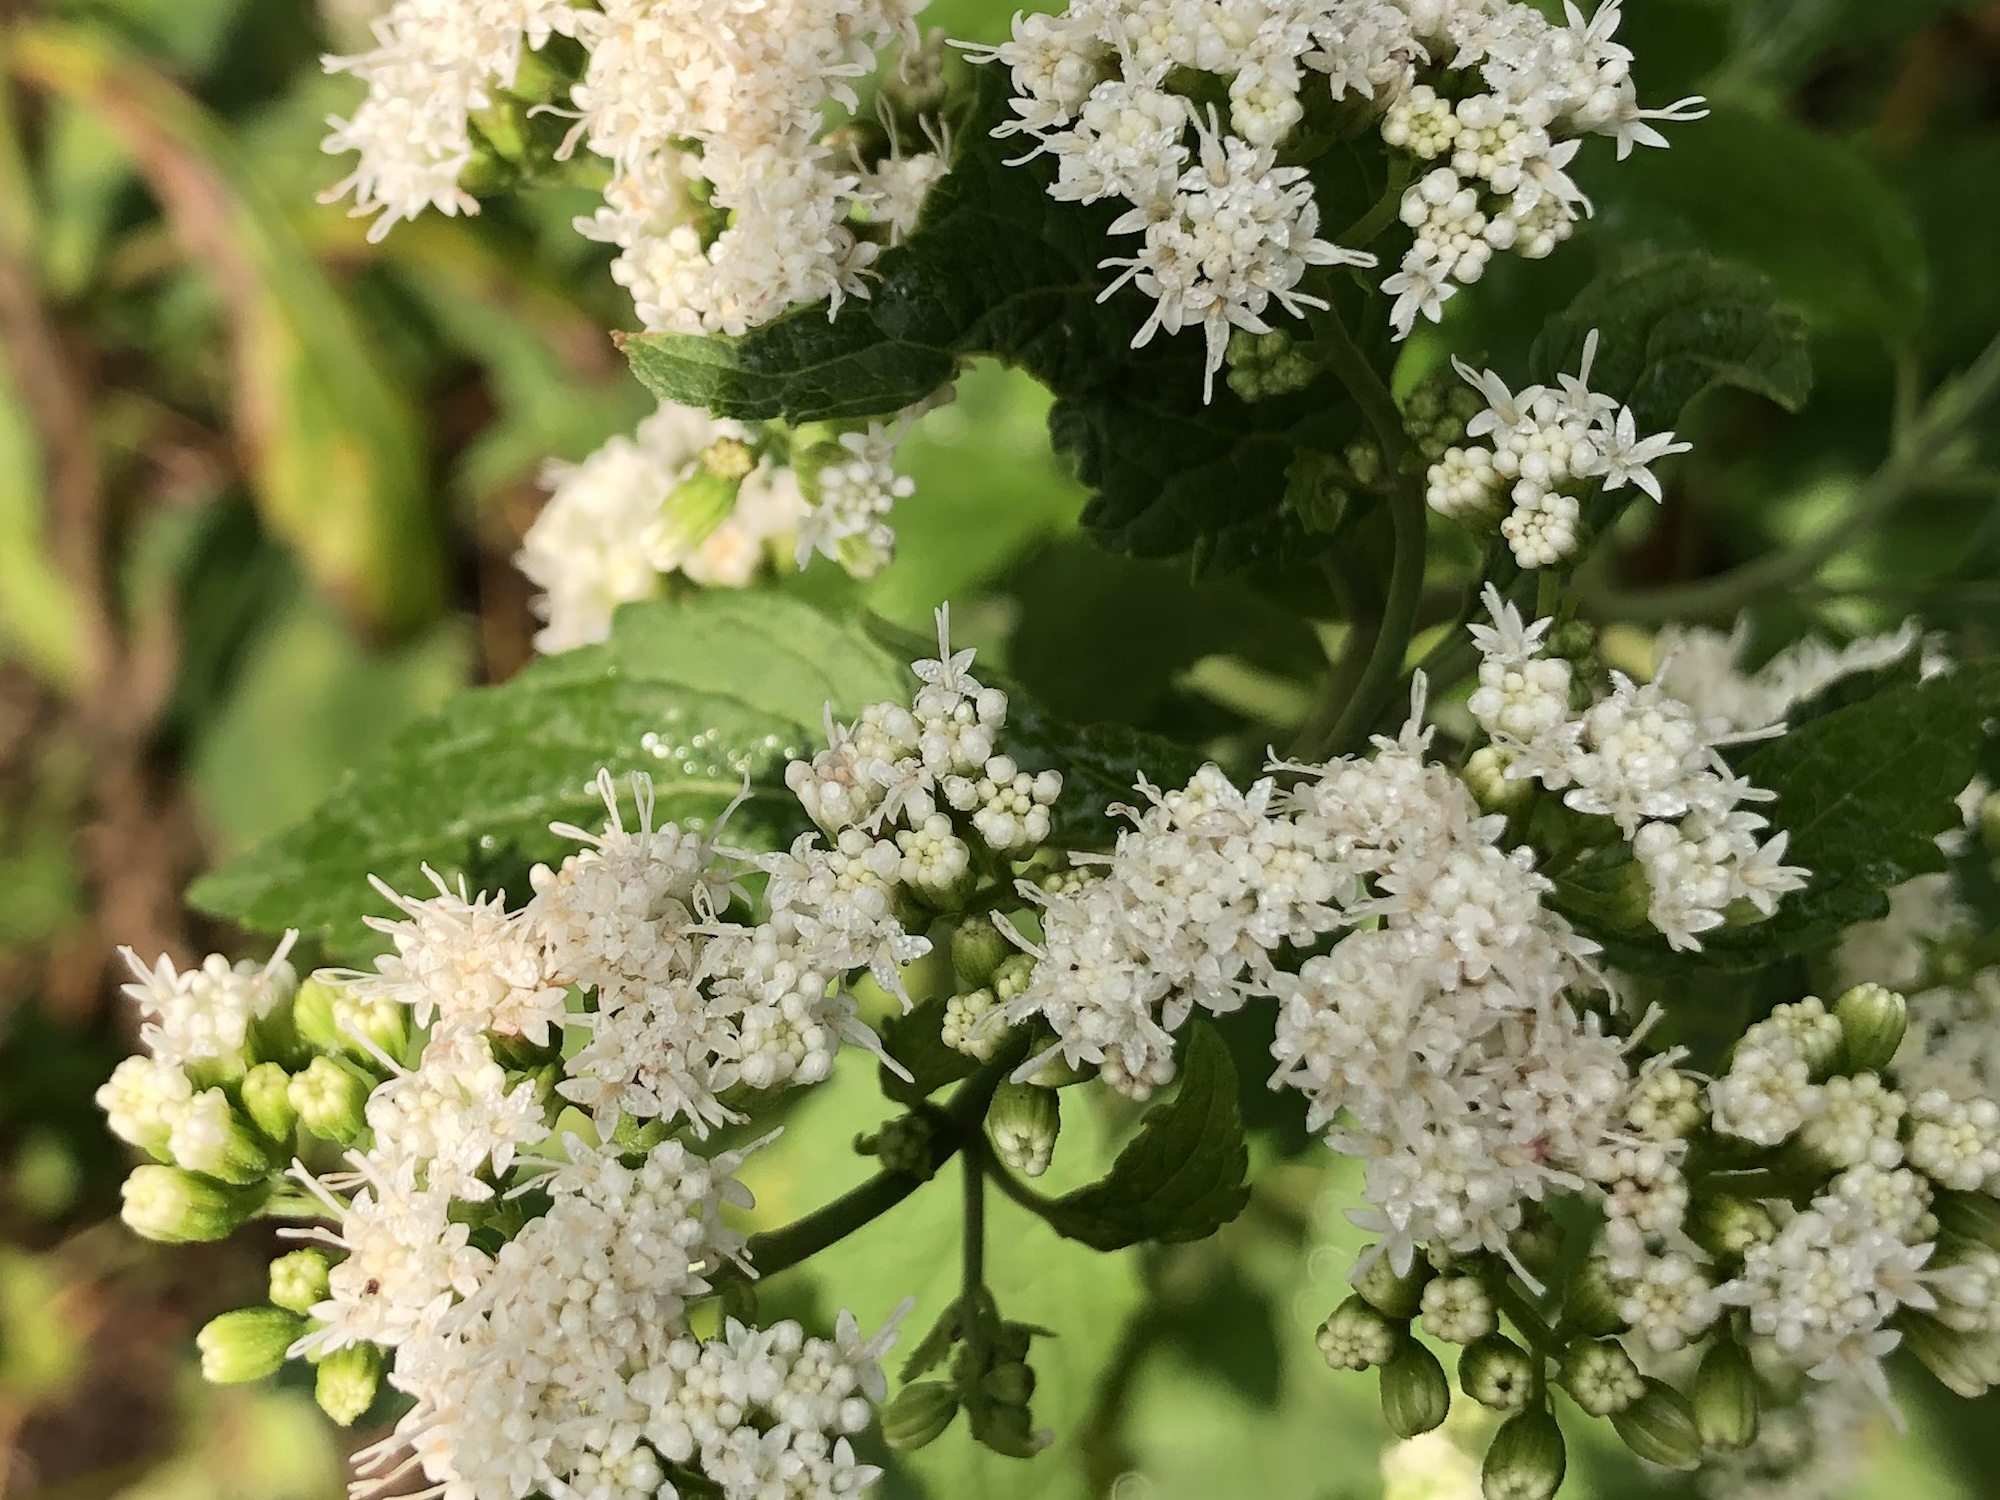 White Snakeroot by Agawa Path in Madison, Wisconsin on September 13, 2020.